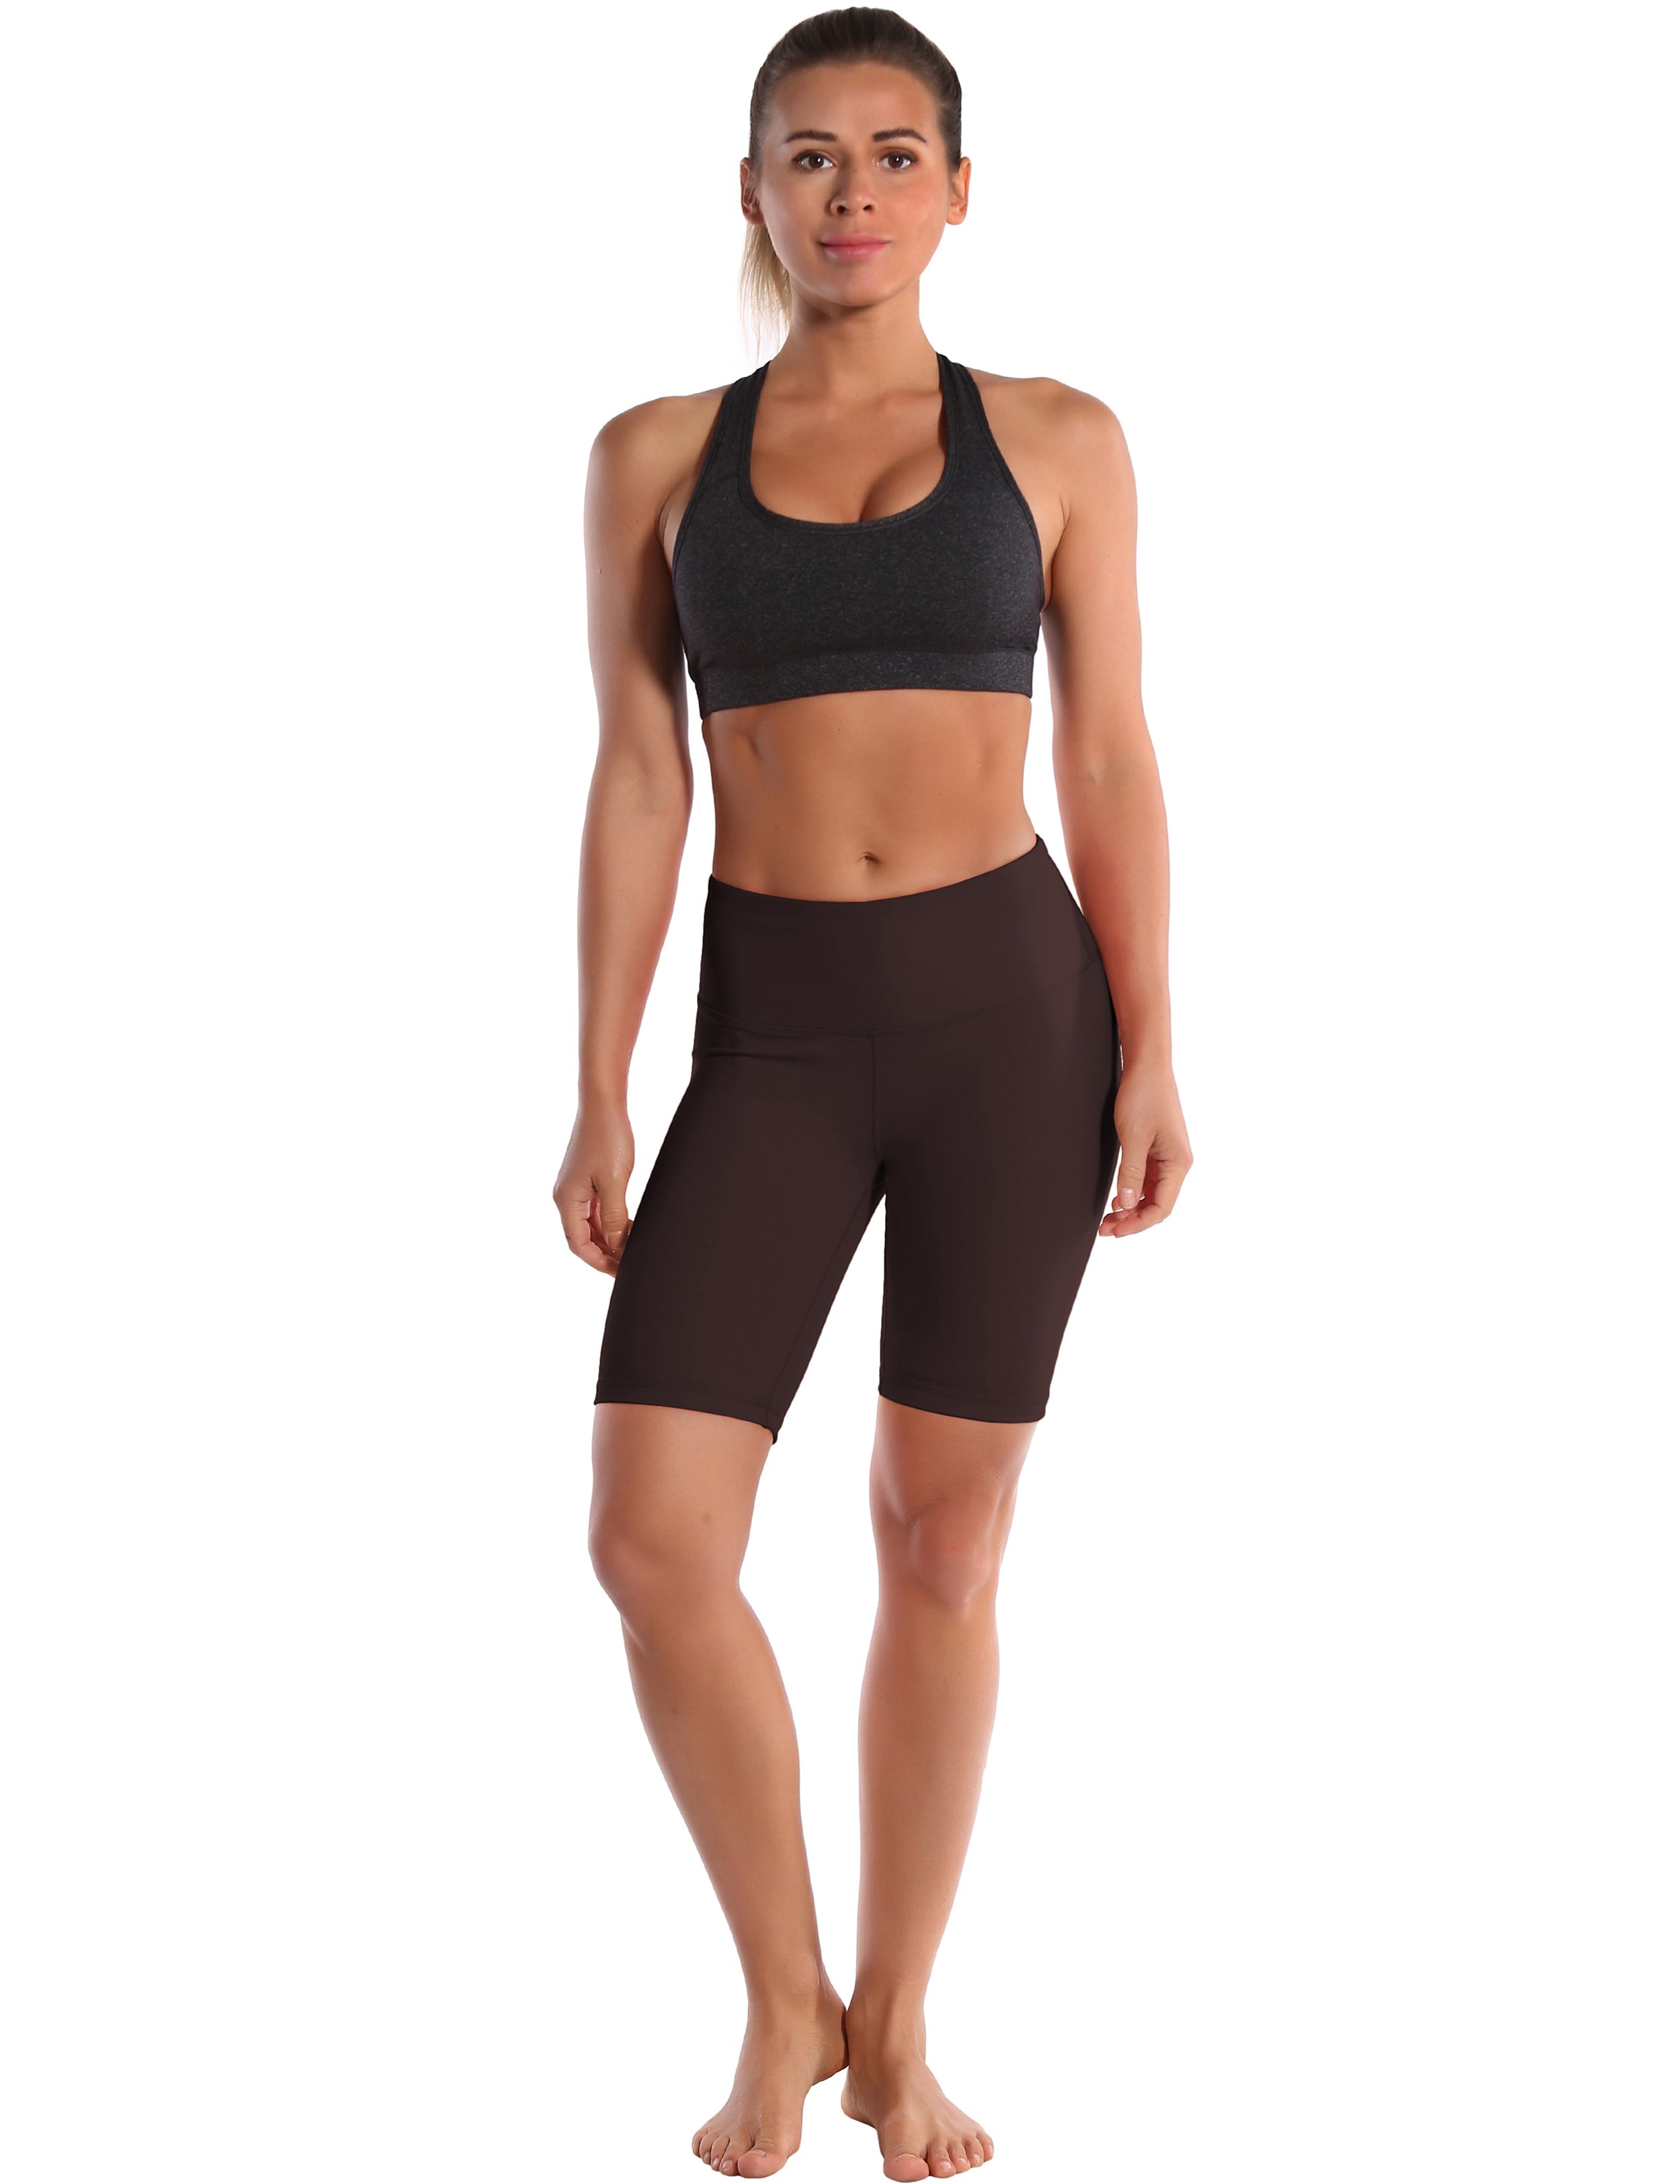 8" High Waist Biking Shorts mahoganymaroon Sleek, soft, smooth and totally comfortable: our newest style is here. Softest-ever fabric High elasticity High density 4-way stretch Fabric doesn't attract lint easily No see-through Moisture-wicking Machine wash 75% Nylon, 25% Spandex